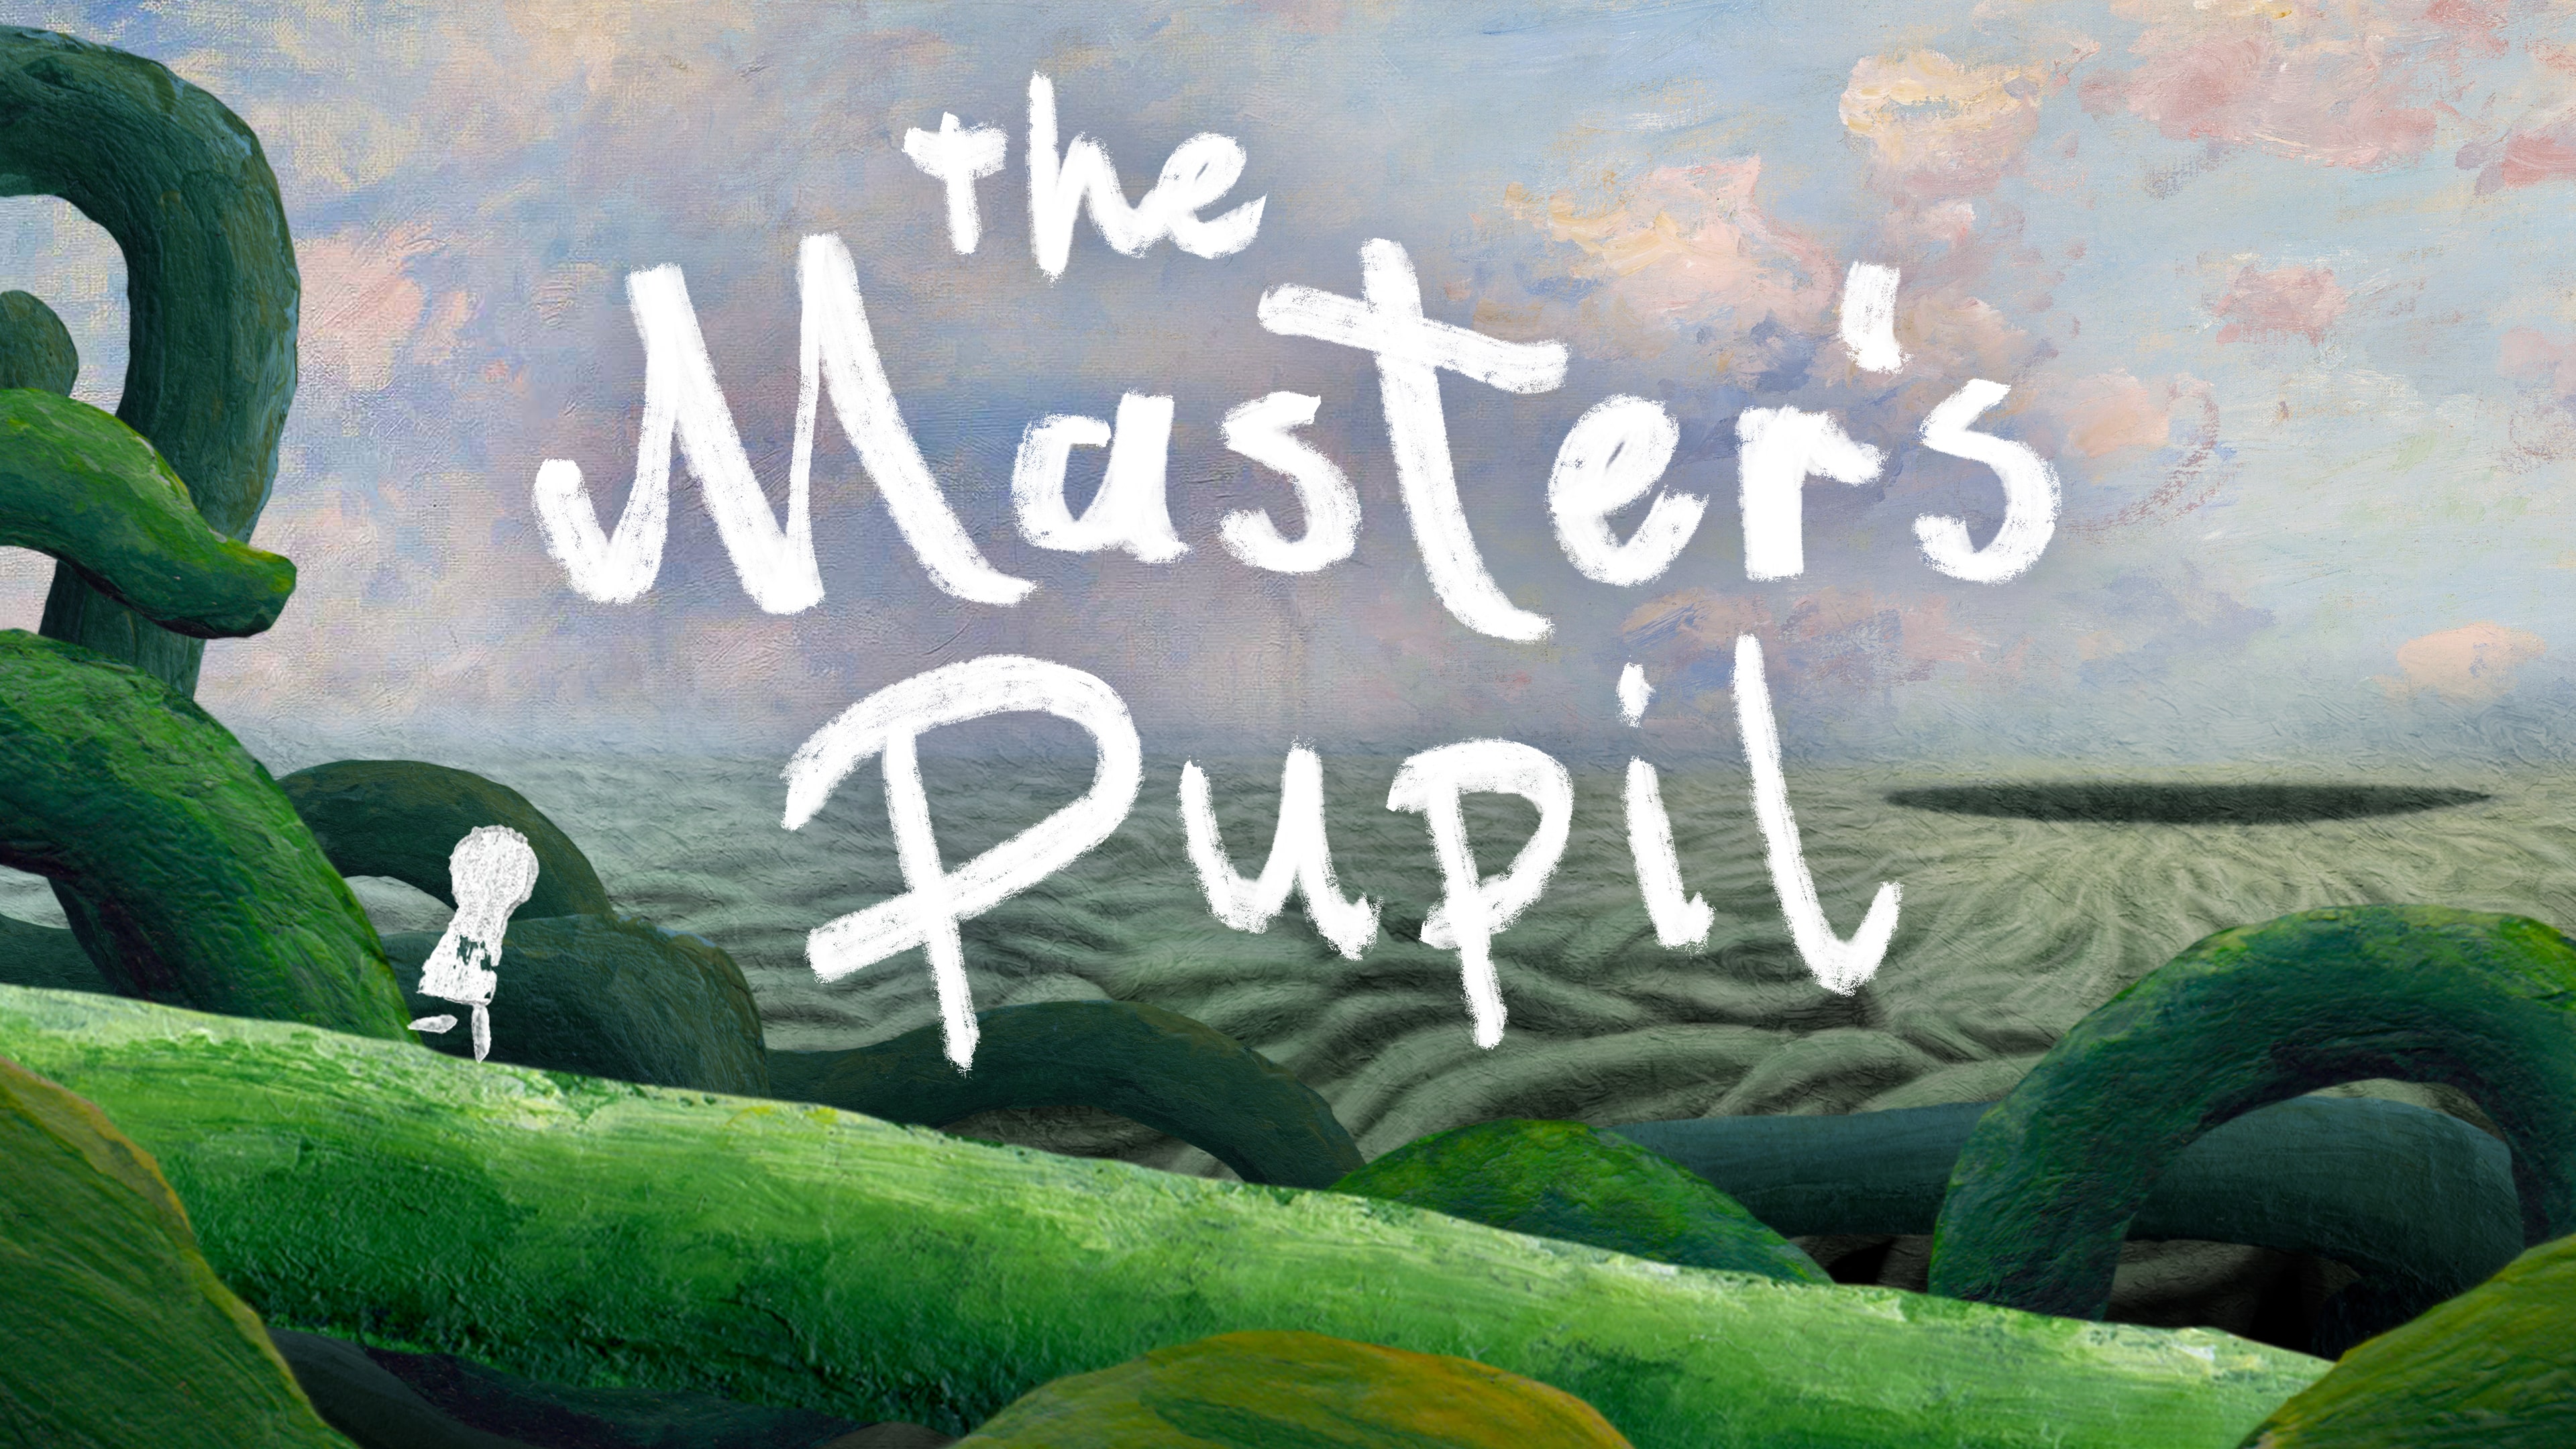 The Master's Pupil (Simplified Chinese, English, Korean, Japanese, Traditional Chinese)